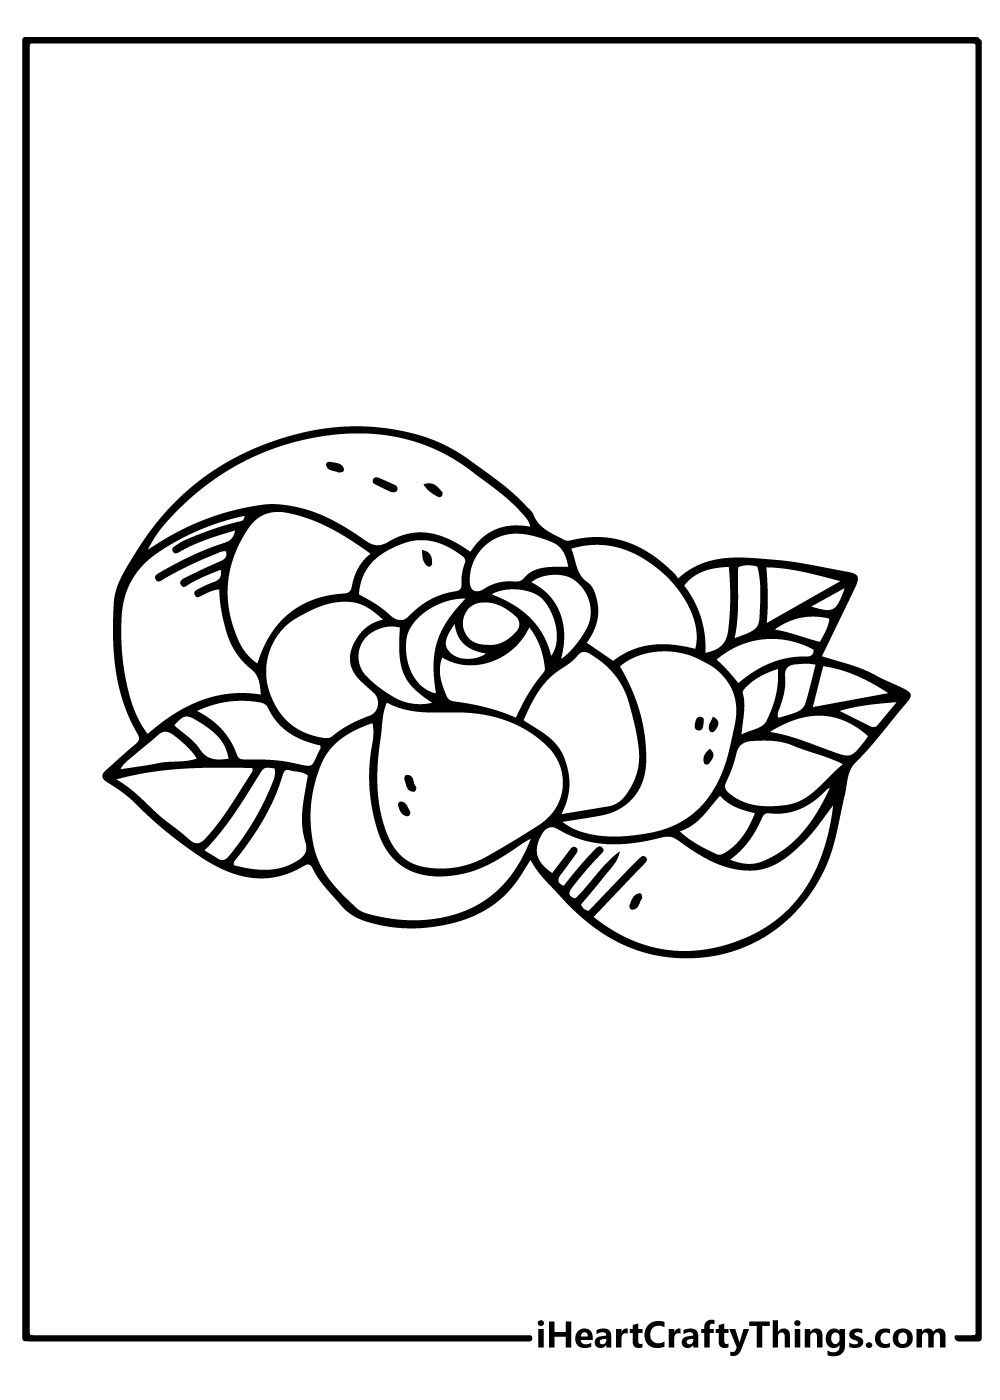 Tattoos Coloring Book for adults free download